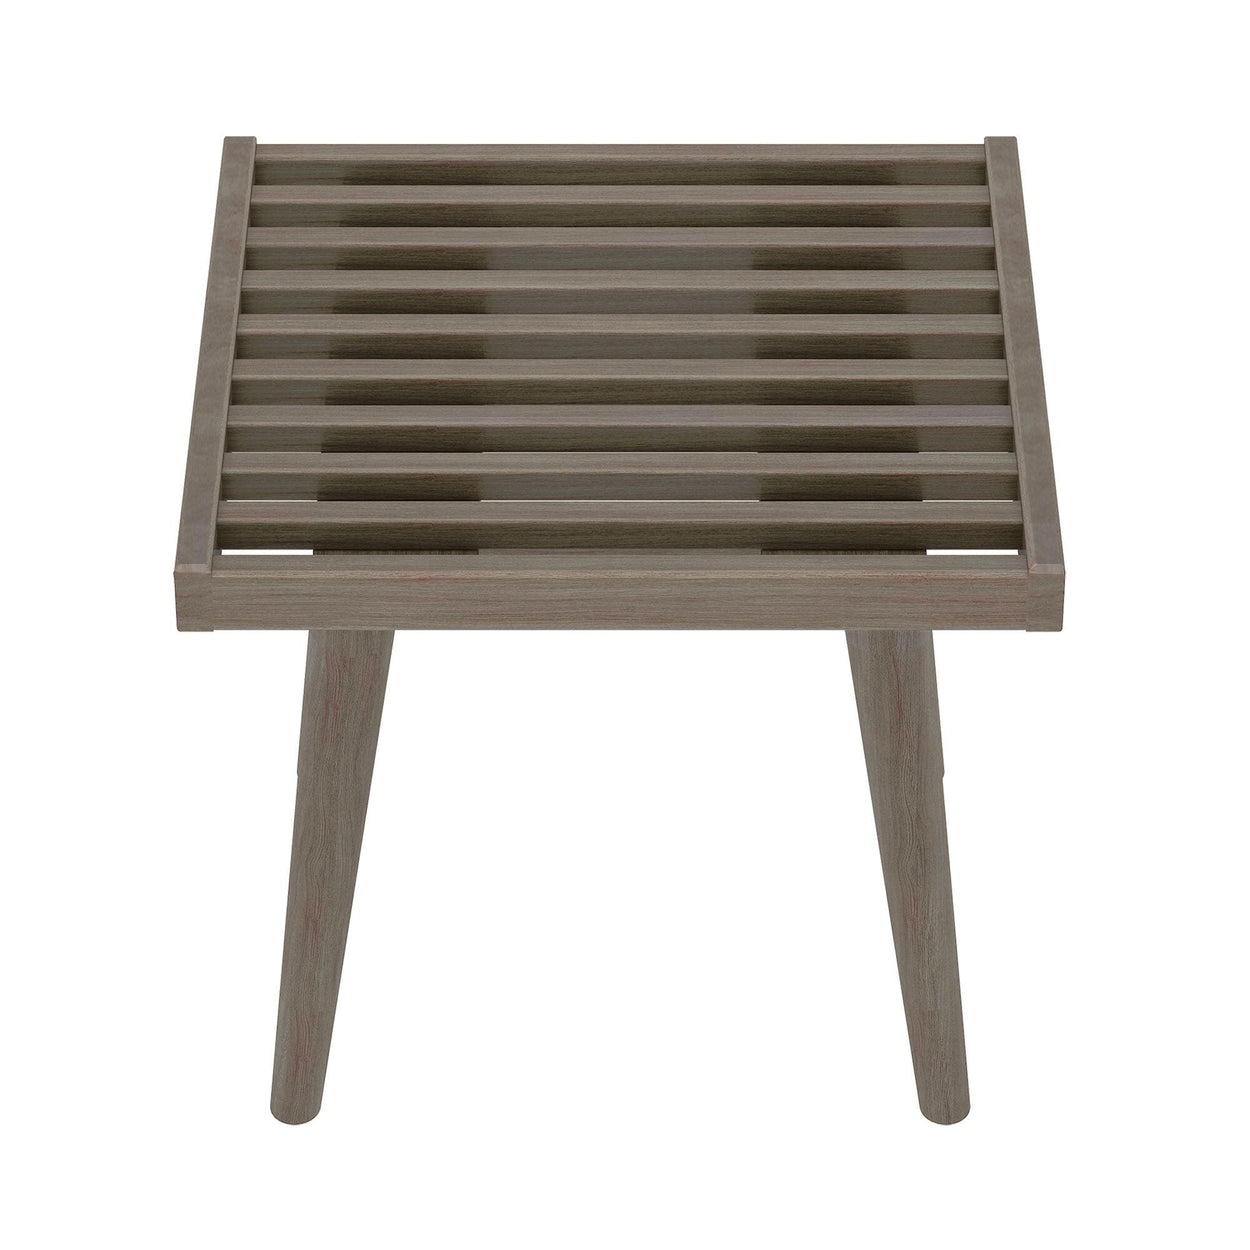 184300-151 : Accessories Mid-Century Modern Single Bench, Clay